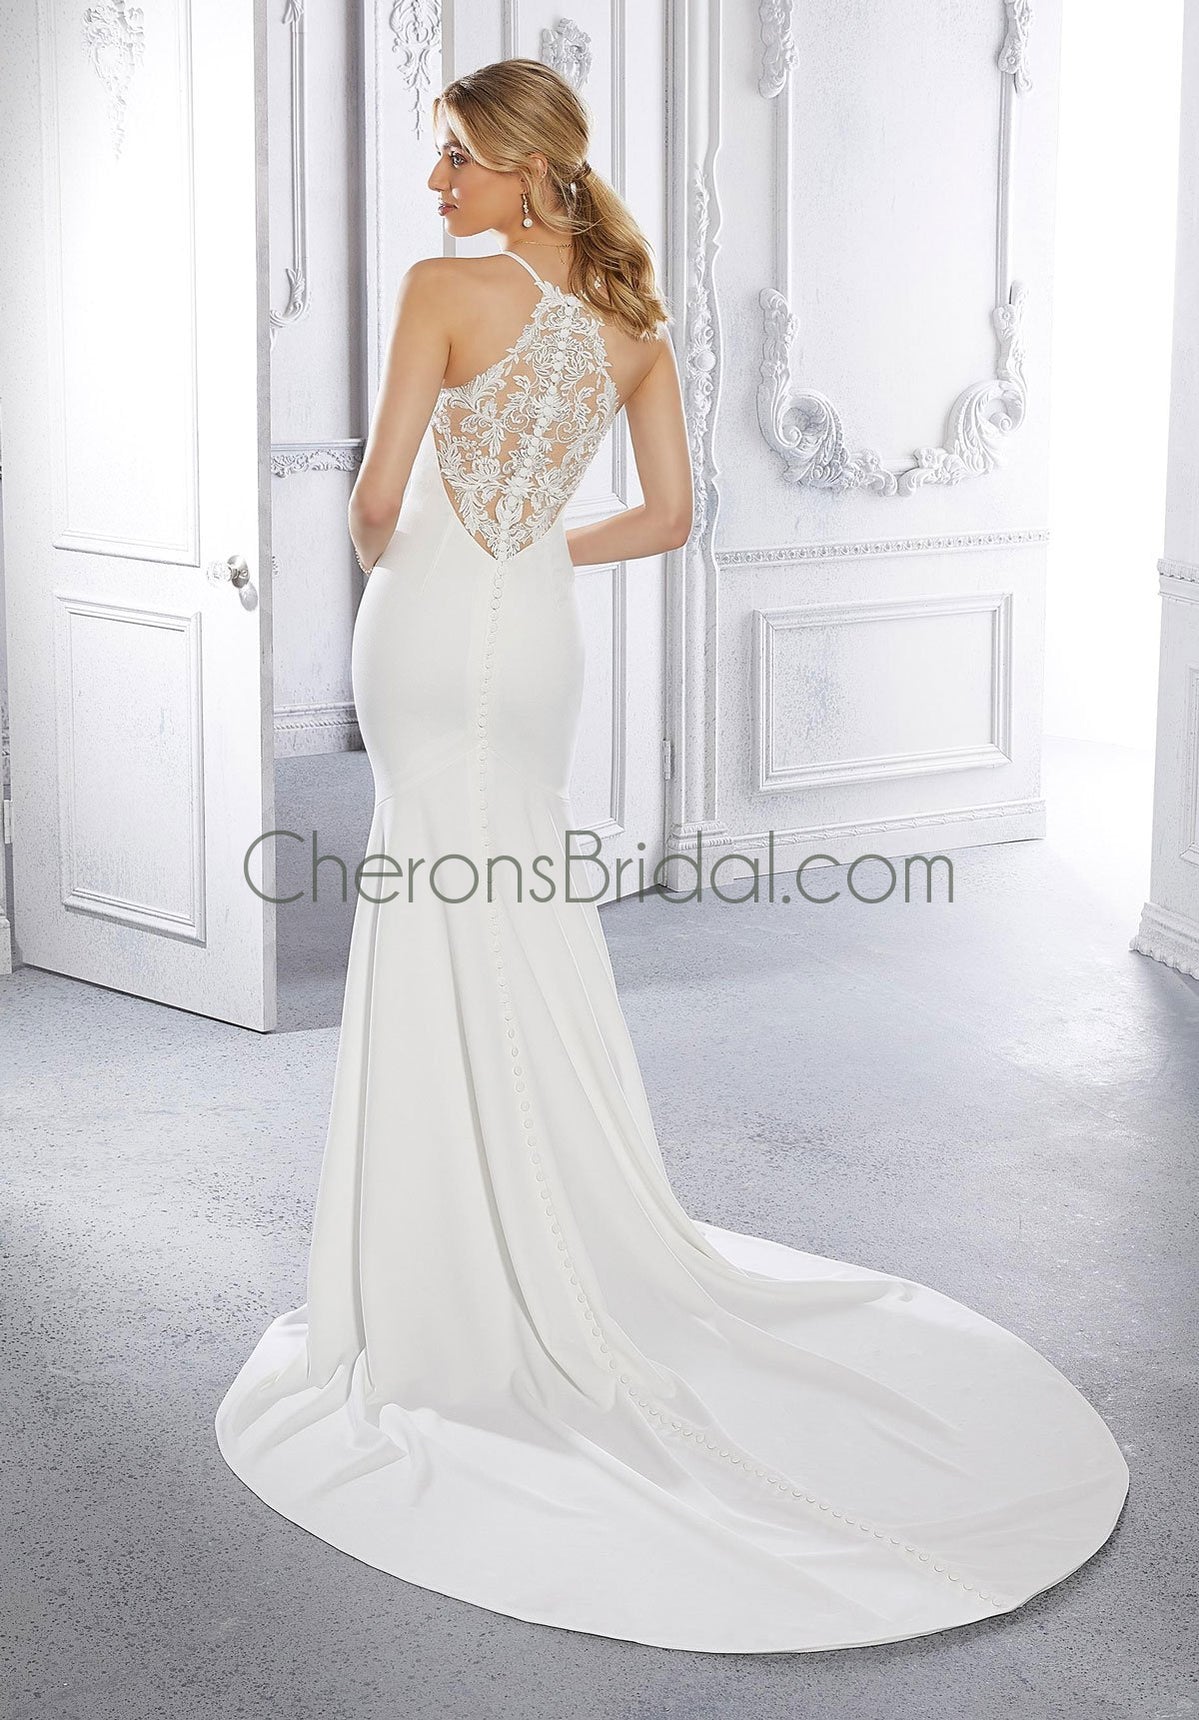 Voyage - 6956 - Cher - Cheron's Bridal, Wedding Gown - Morilee Voyage - - Wedding Gowns Dresses Chattanooga Hixson Shops Boutiques Tennessee TN Georgia GA MSRP Lowest Prices Sale Discount